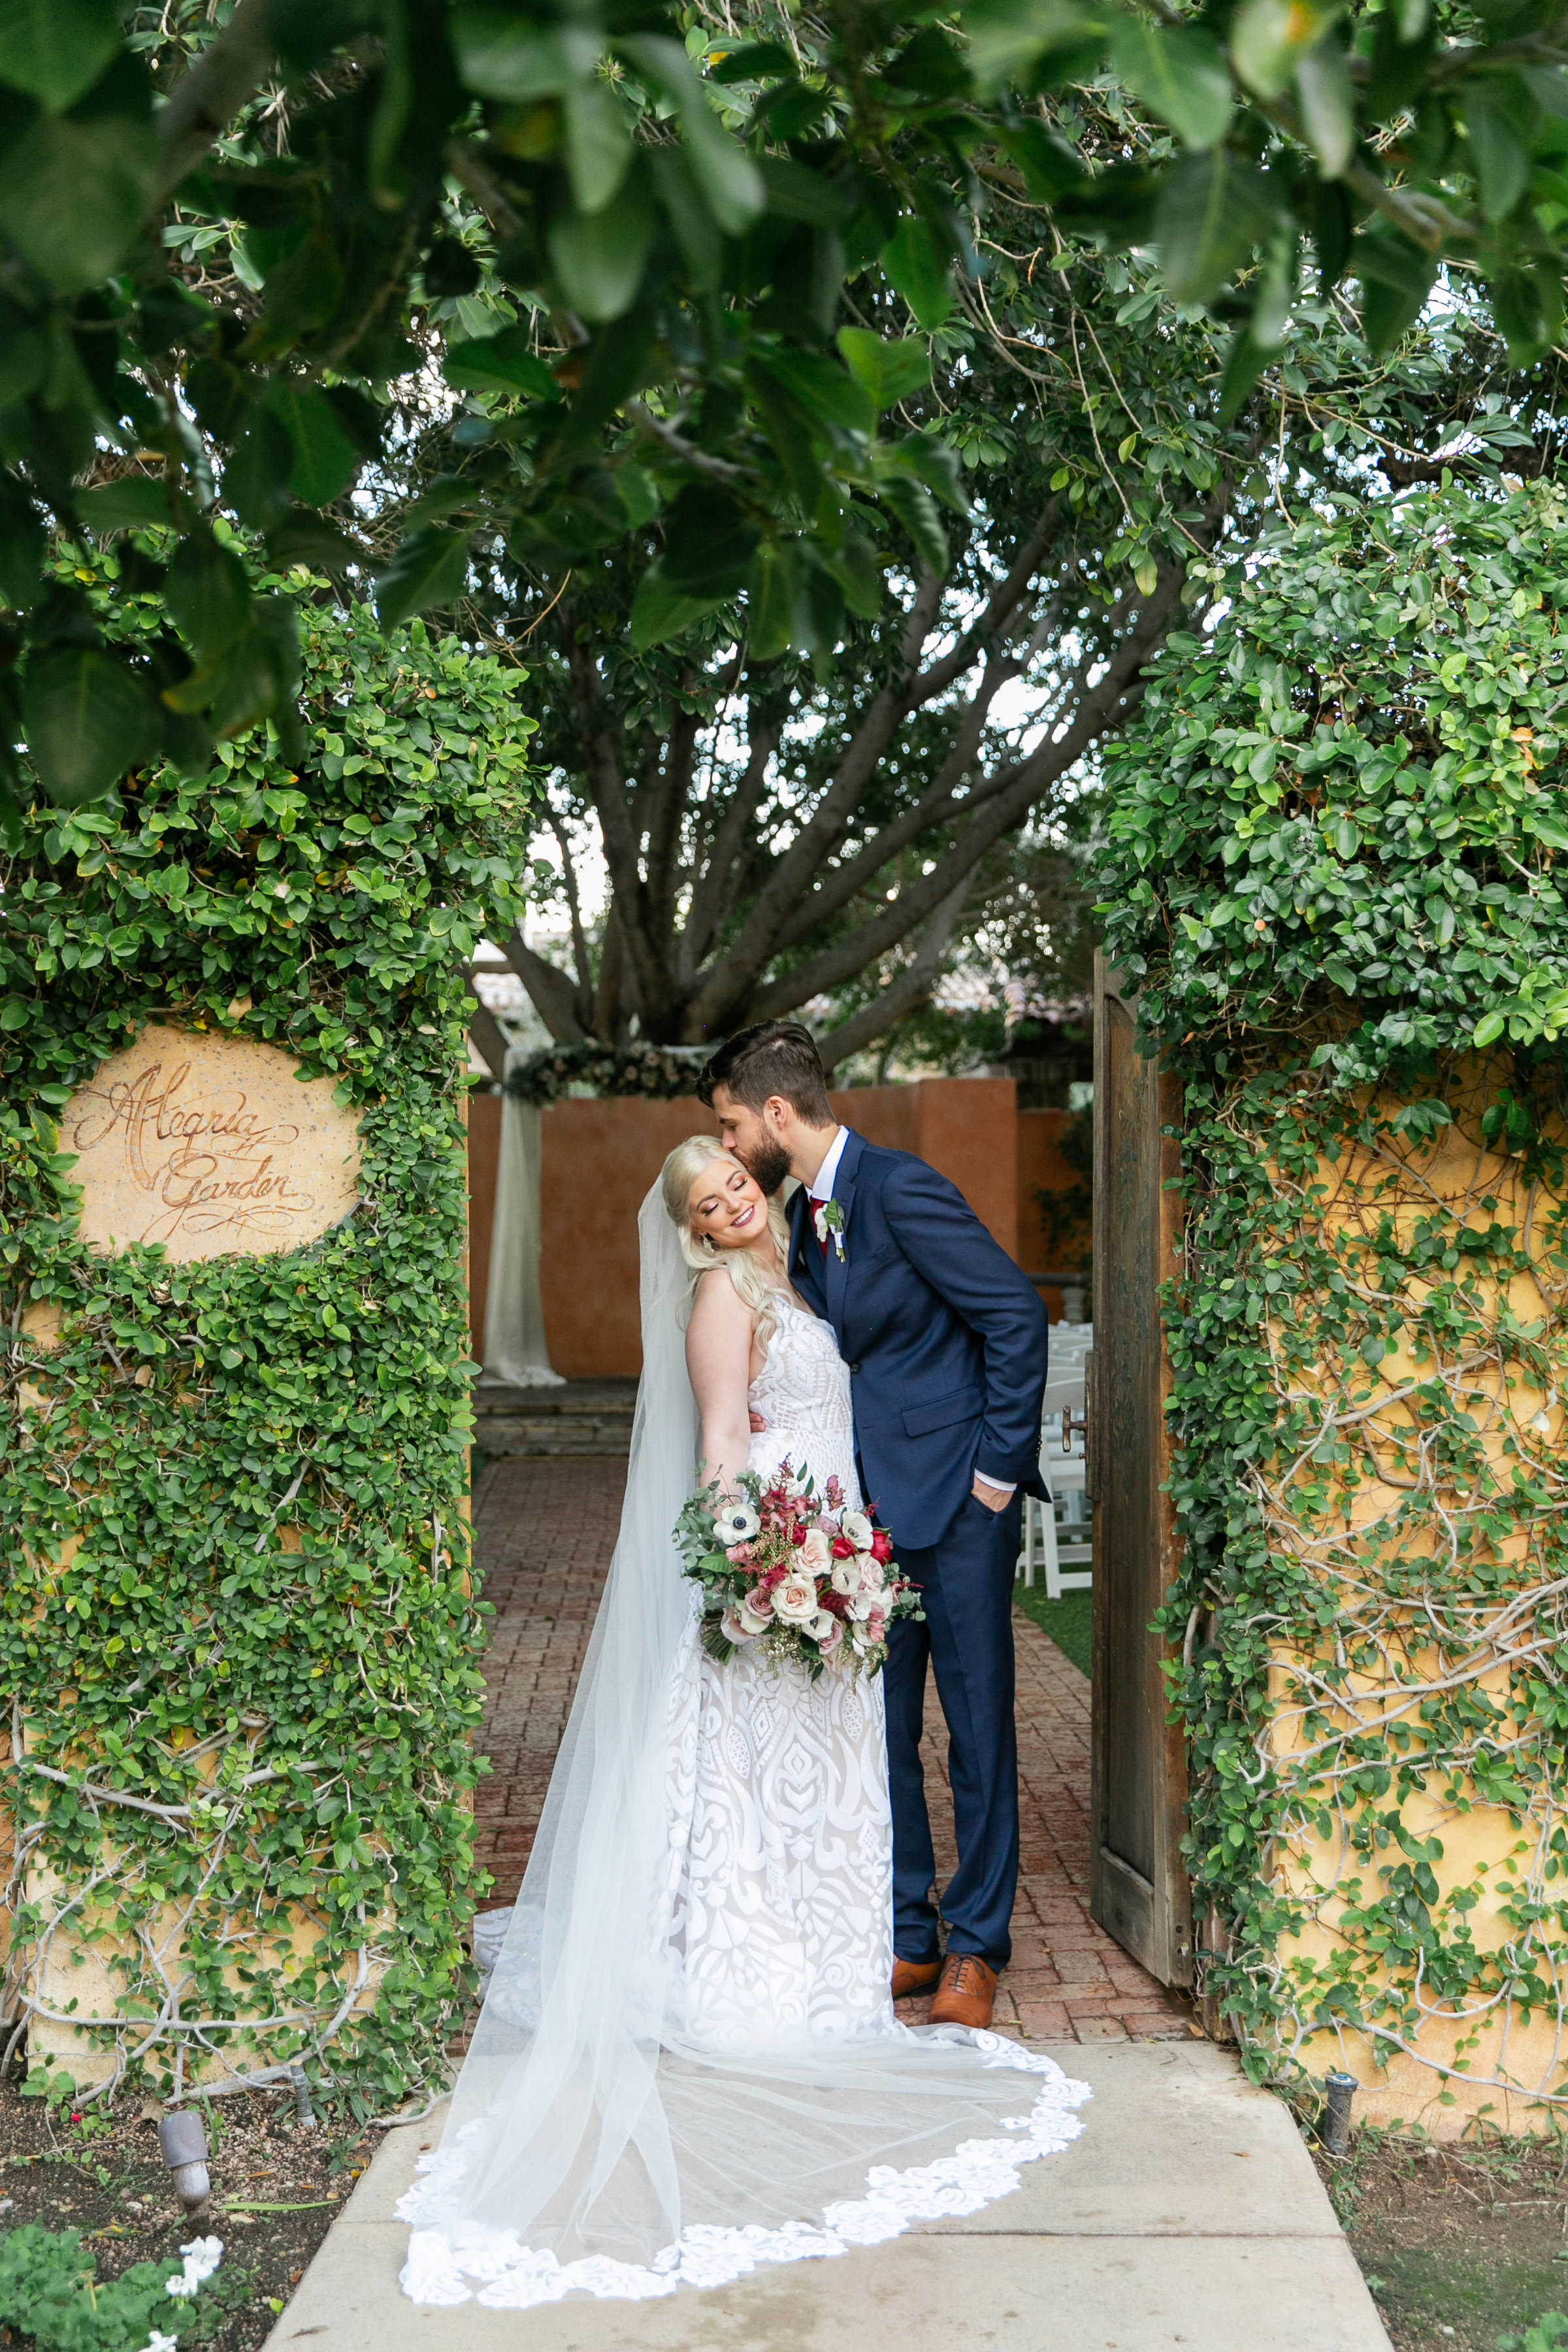 Karlie Colleen Photography - The Royal Palms Wedding - Some Like It Classic - Alex & Sam-477